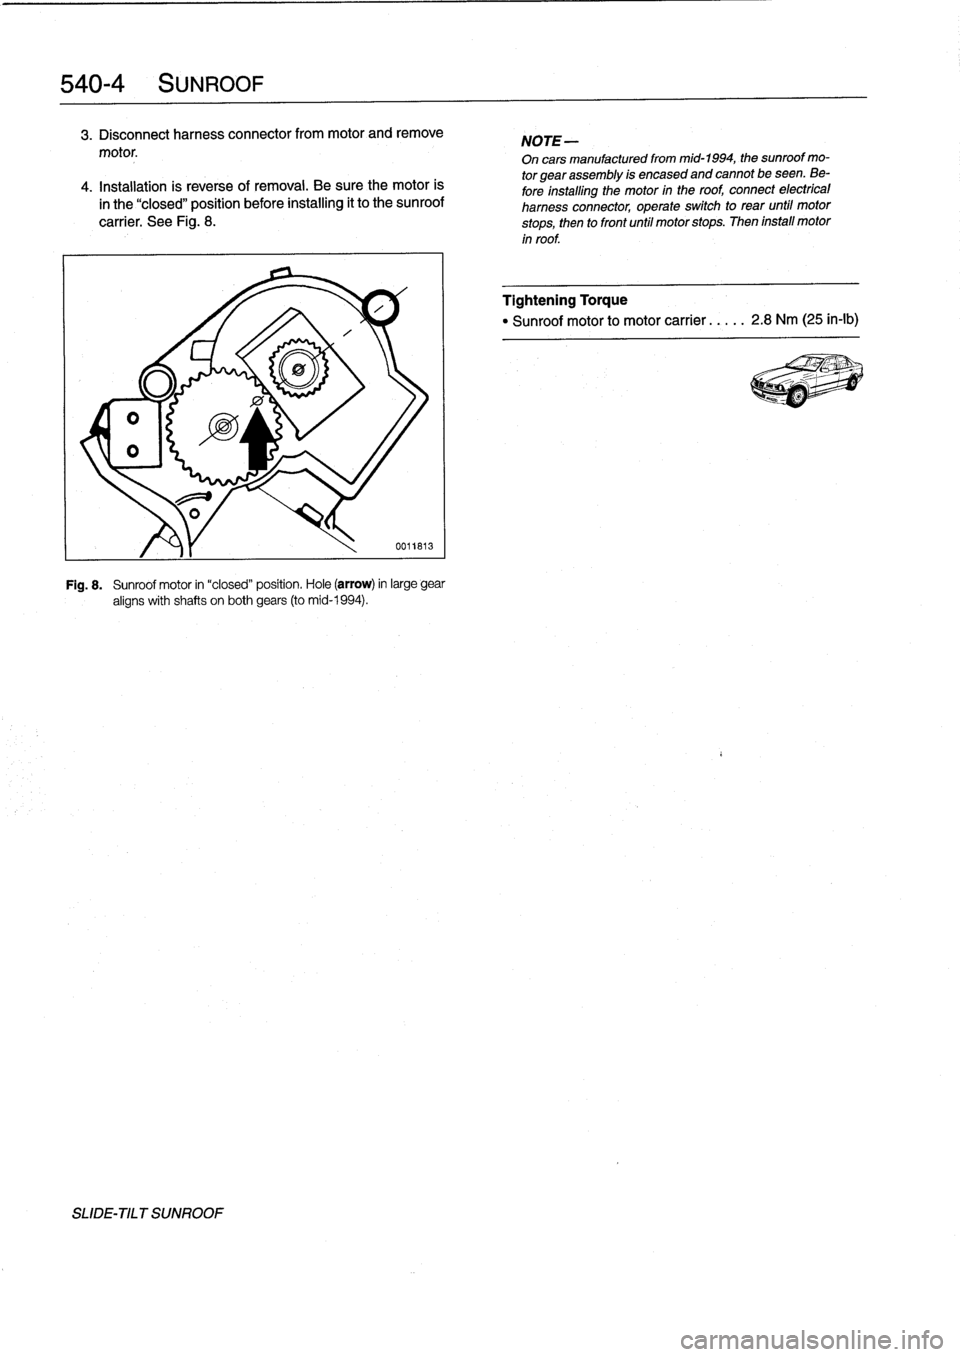 BMW 318i 1997 E36 Workshop Manual 
540-
4
SUNROOF

3
.
Disconnect
harness
connector
from
motor
and
remove

motor
.

4
.
Installation
is
reverse
of
removal
.
Be
sure
the
motor
is
in
the
"closed"
position
before
installing
it
to
the
sun